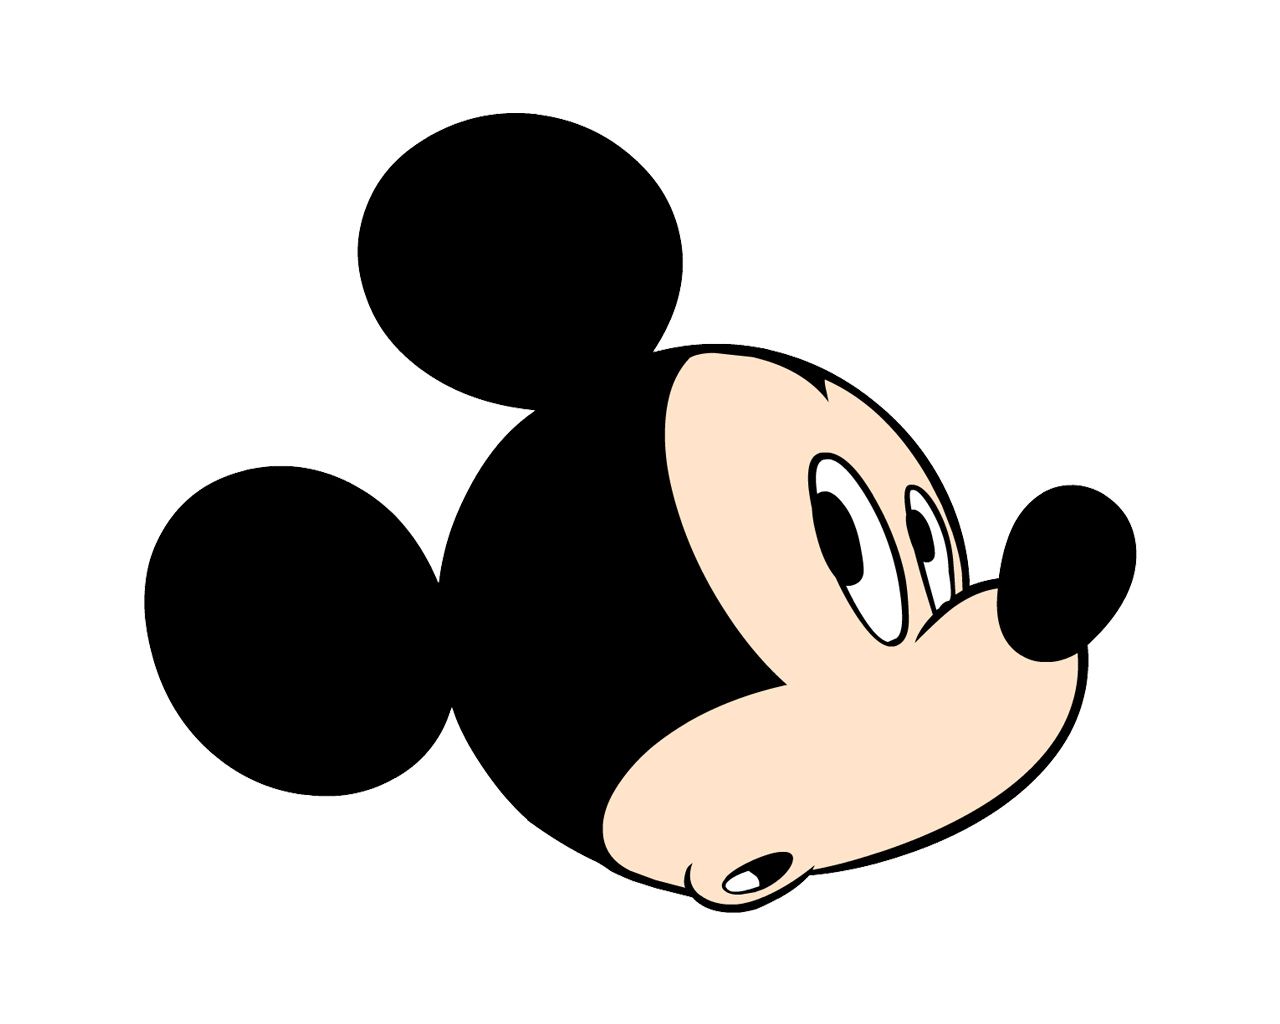 Mickey Mouse 436 Hd Wallpapers in Cartoons - Imagesci.